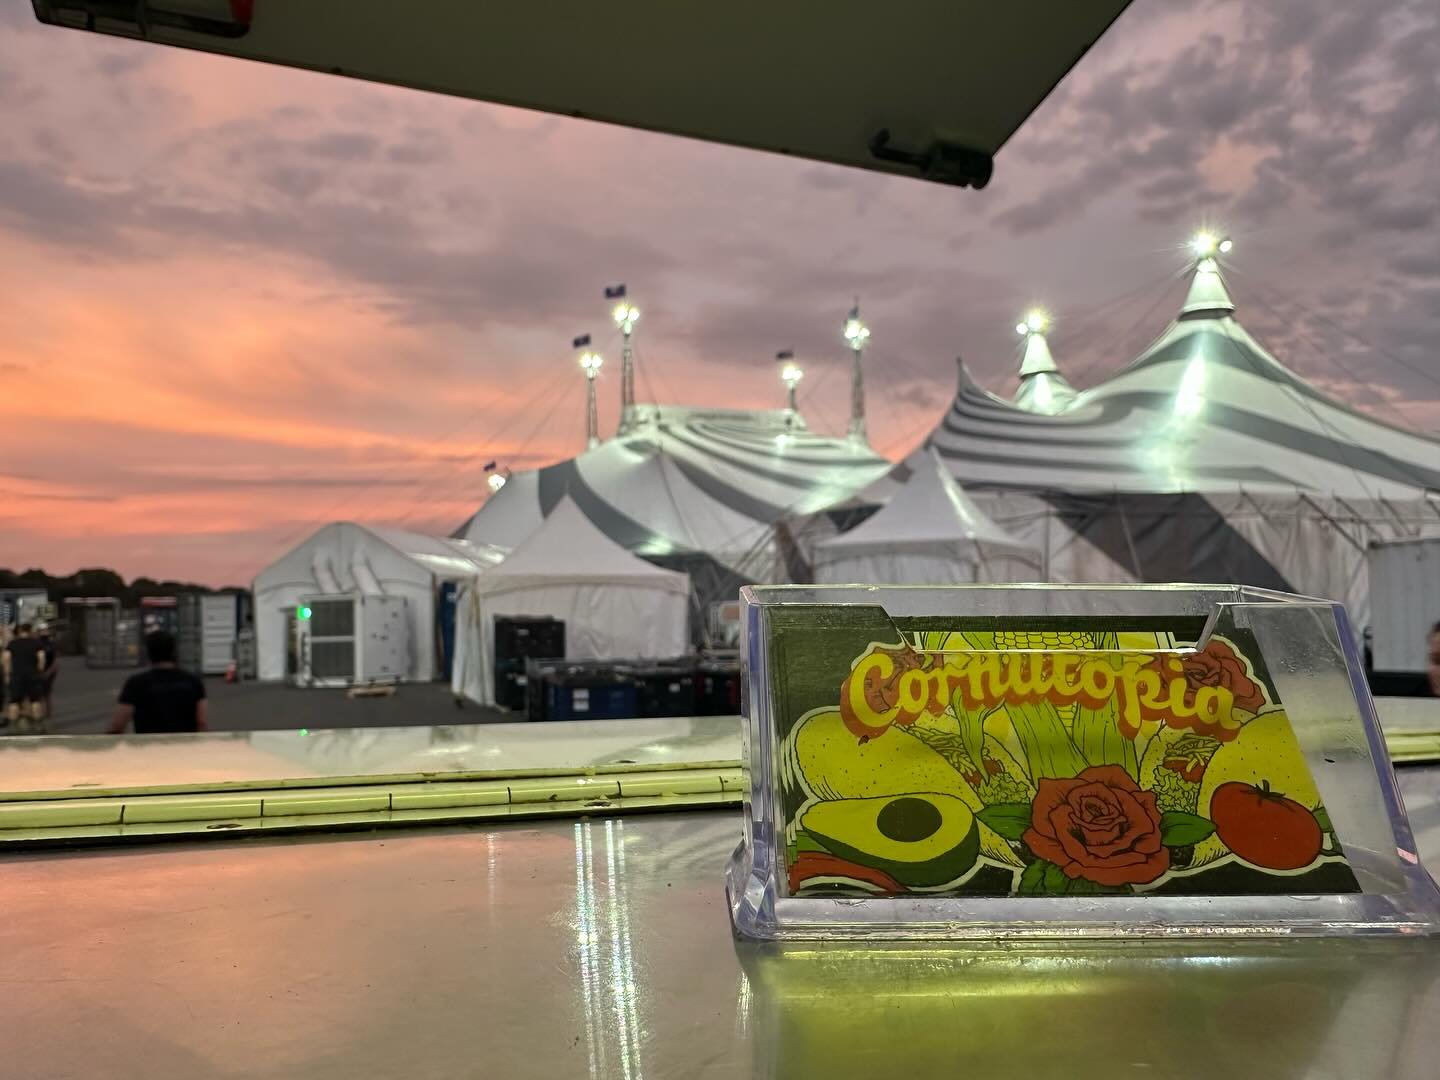 Have you run away and joined the circus? Luckily we cater everywhere! @cirquedusoleil 🎪✨

#catering #mobilecatering #melbourne #circus #Foodtruck #foodvan #Foodtrucks #mexicanfood #kensington #showgrounds #tacos #staffparty #corporateevents #events 